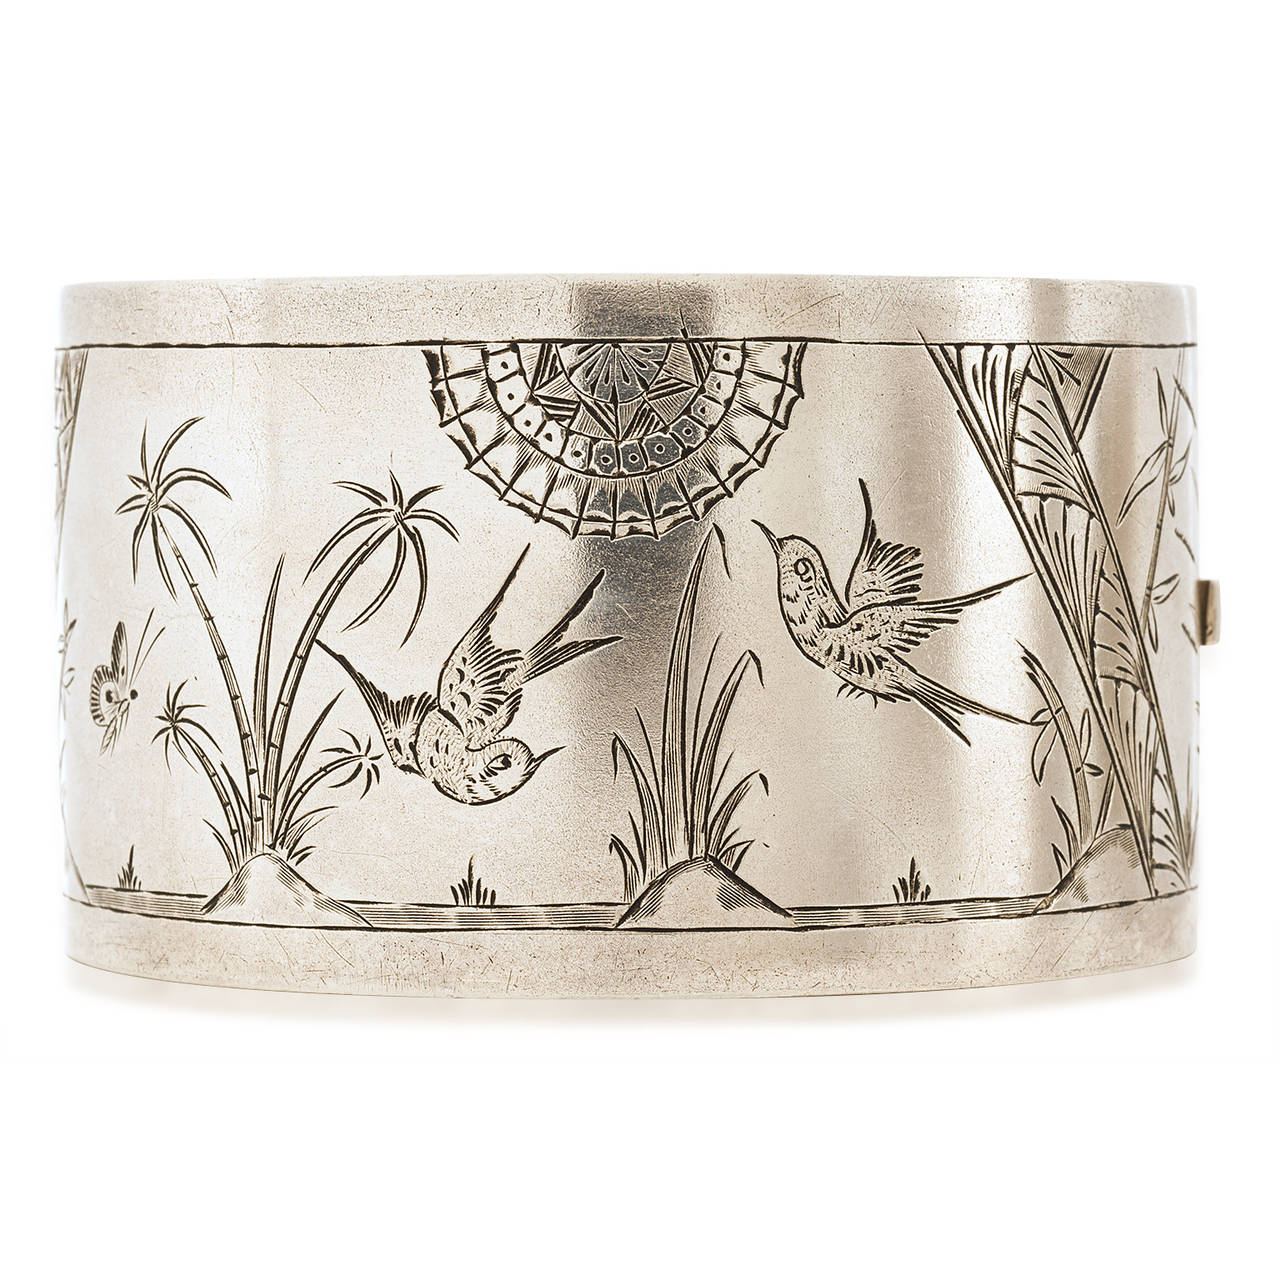 This stunning bracelet is hand crafted in England. The exact date is not known but is from the 1880's. The etching is of birds and the geometric accents modernize the total look.  The width is 1 1/2" high and the oval shape is comfortable on